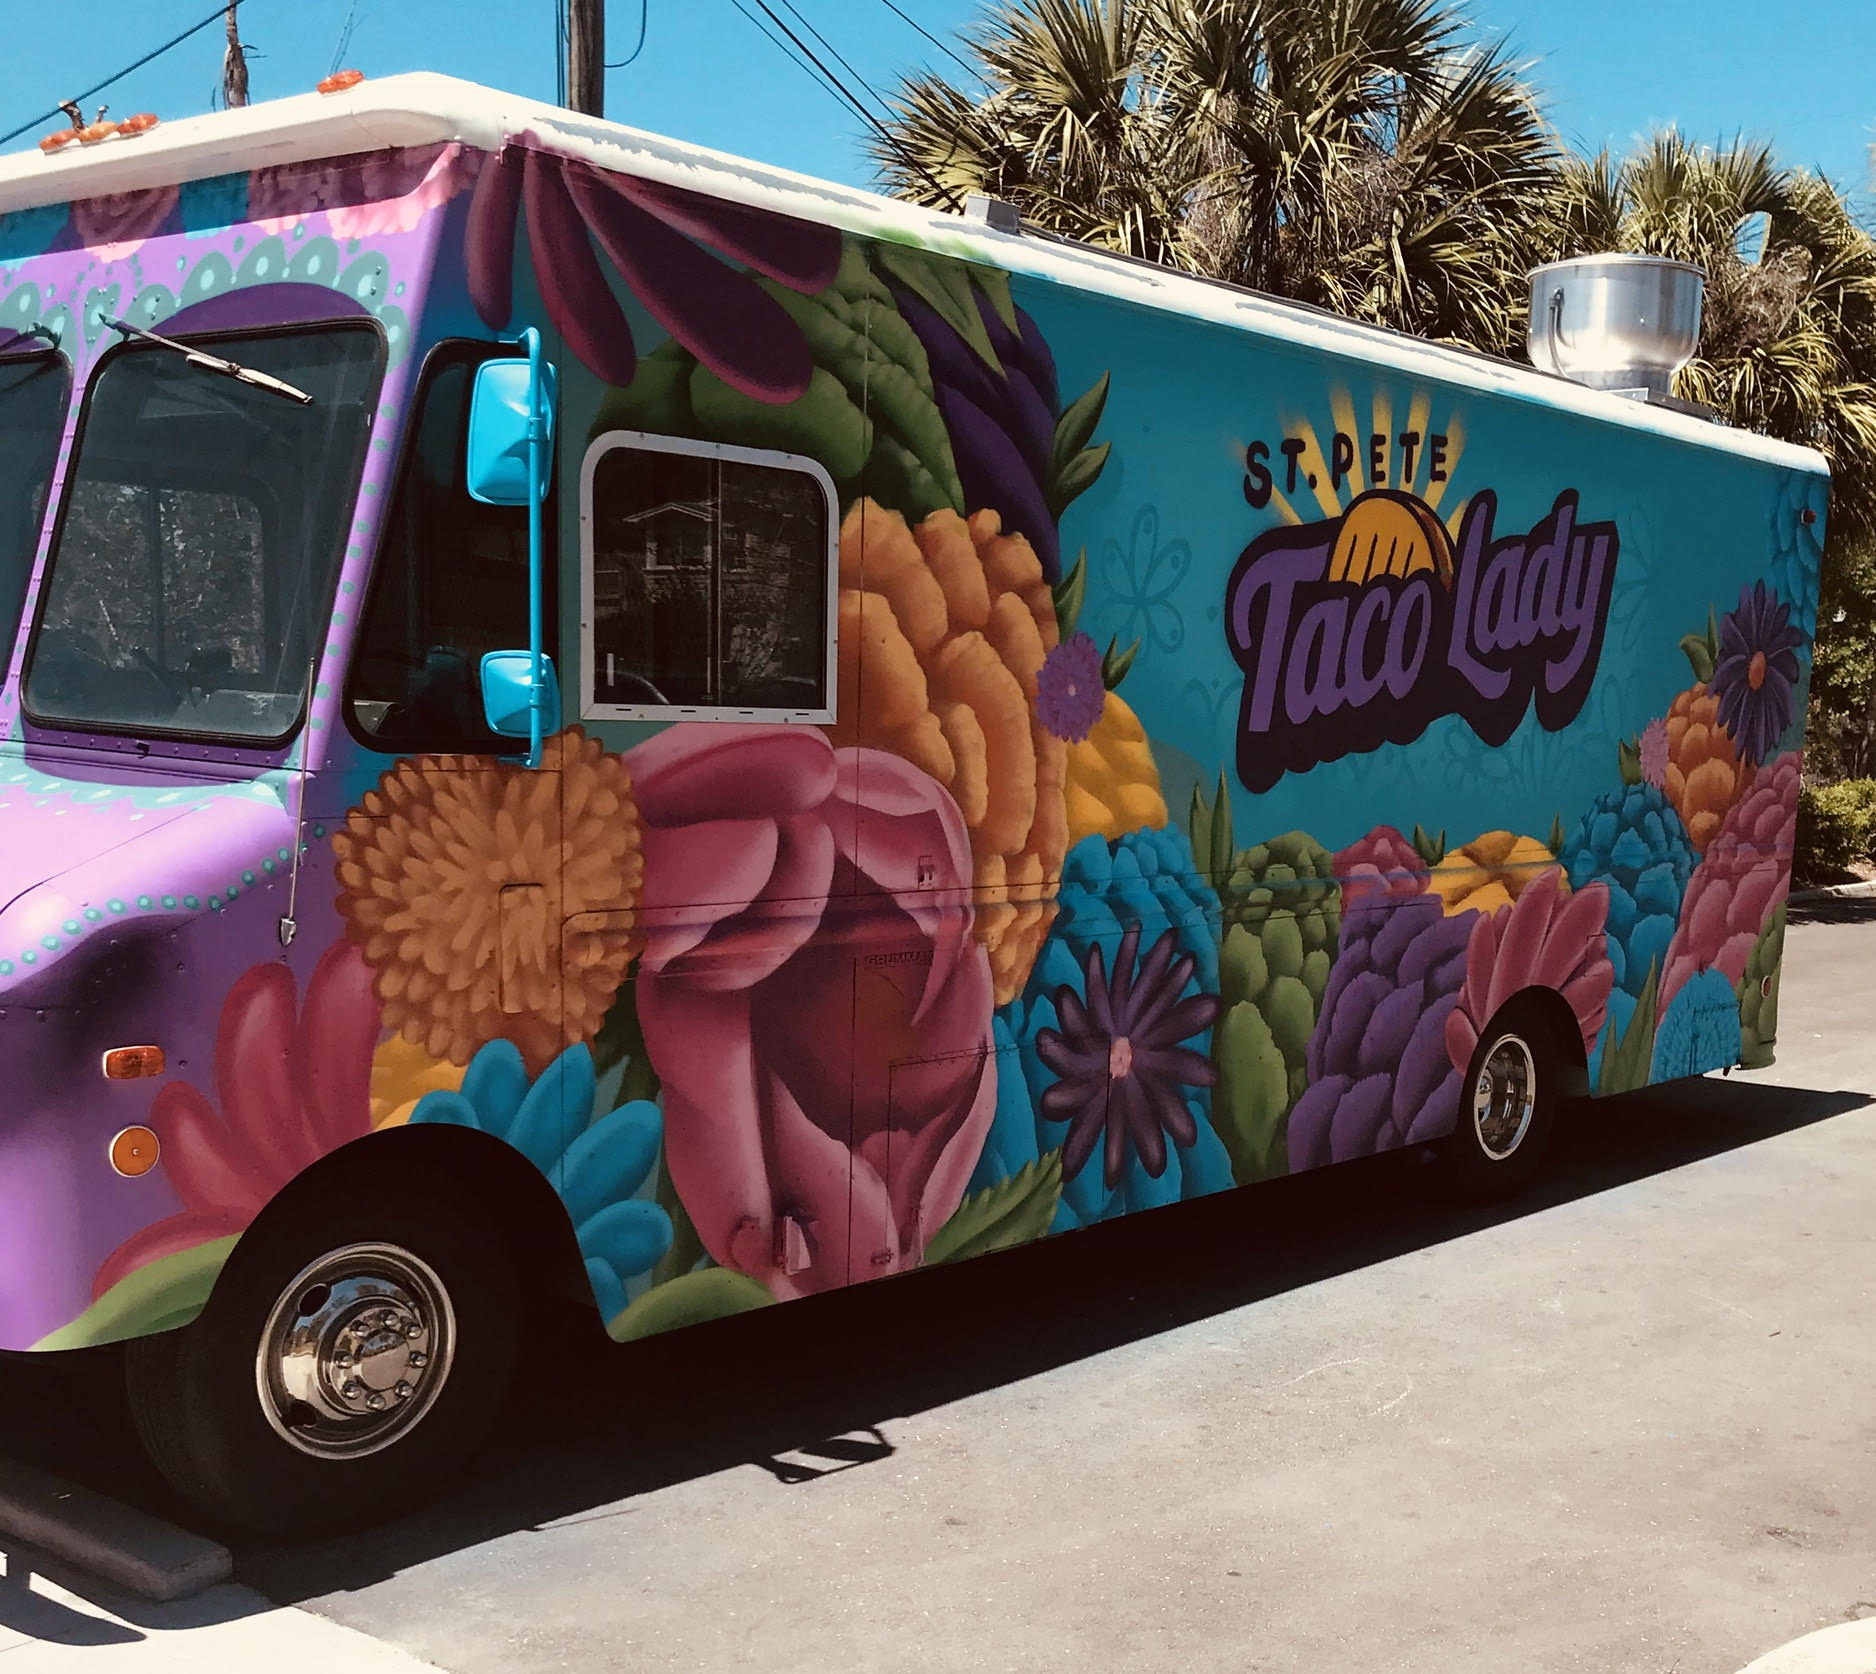 St Pete Taco Lady Food Truck